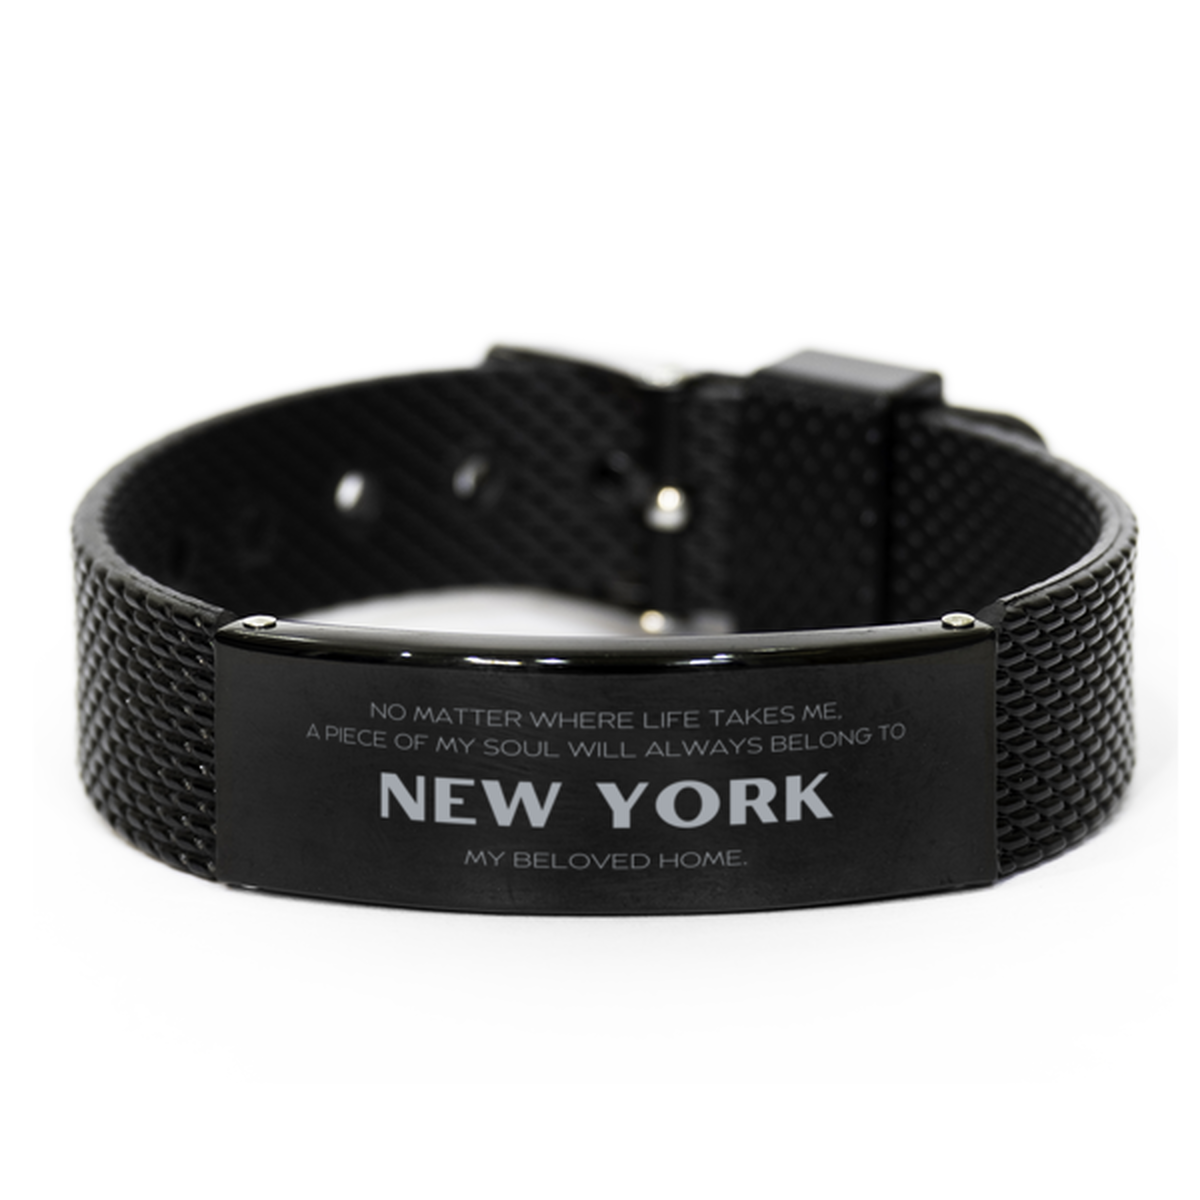 Love New York State Gifts, My soul will always belong to New York, Proud Black Shark Mesh Bracelet, Birthday Unique Gifts For New York Men, Women, Friends